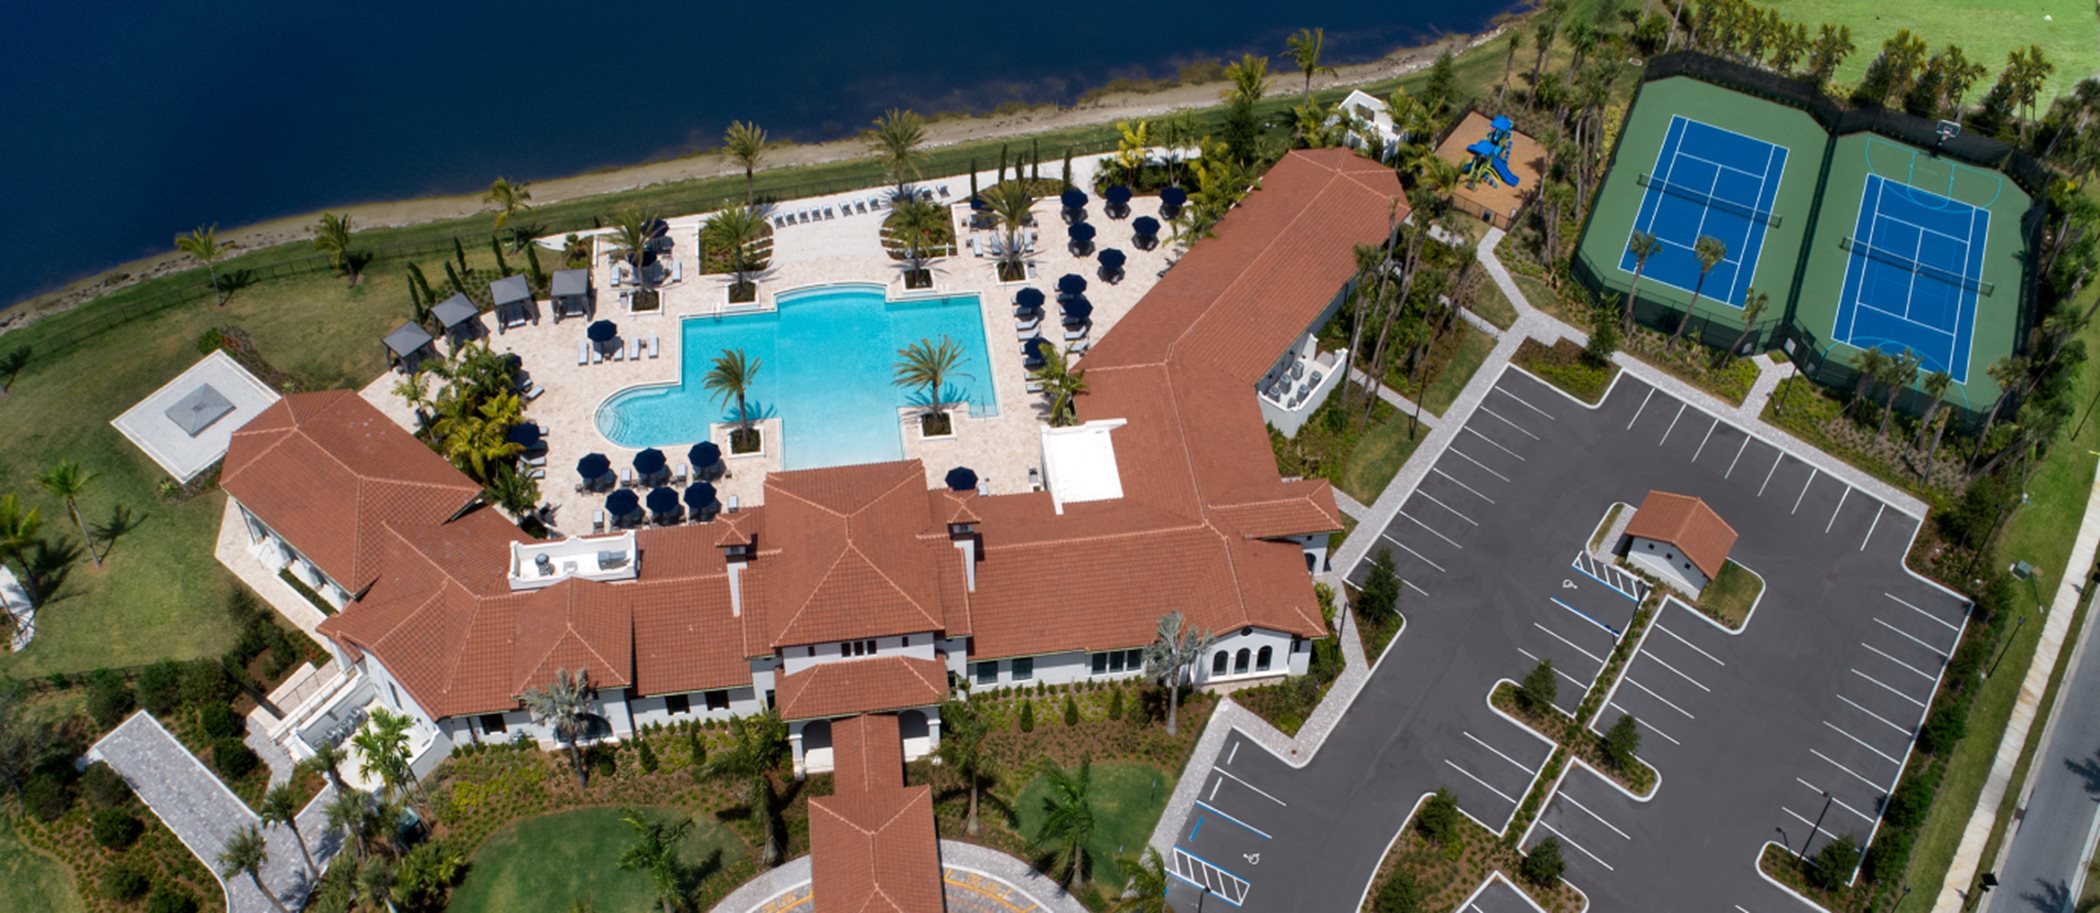 Drone shot of Club Grande and pool